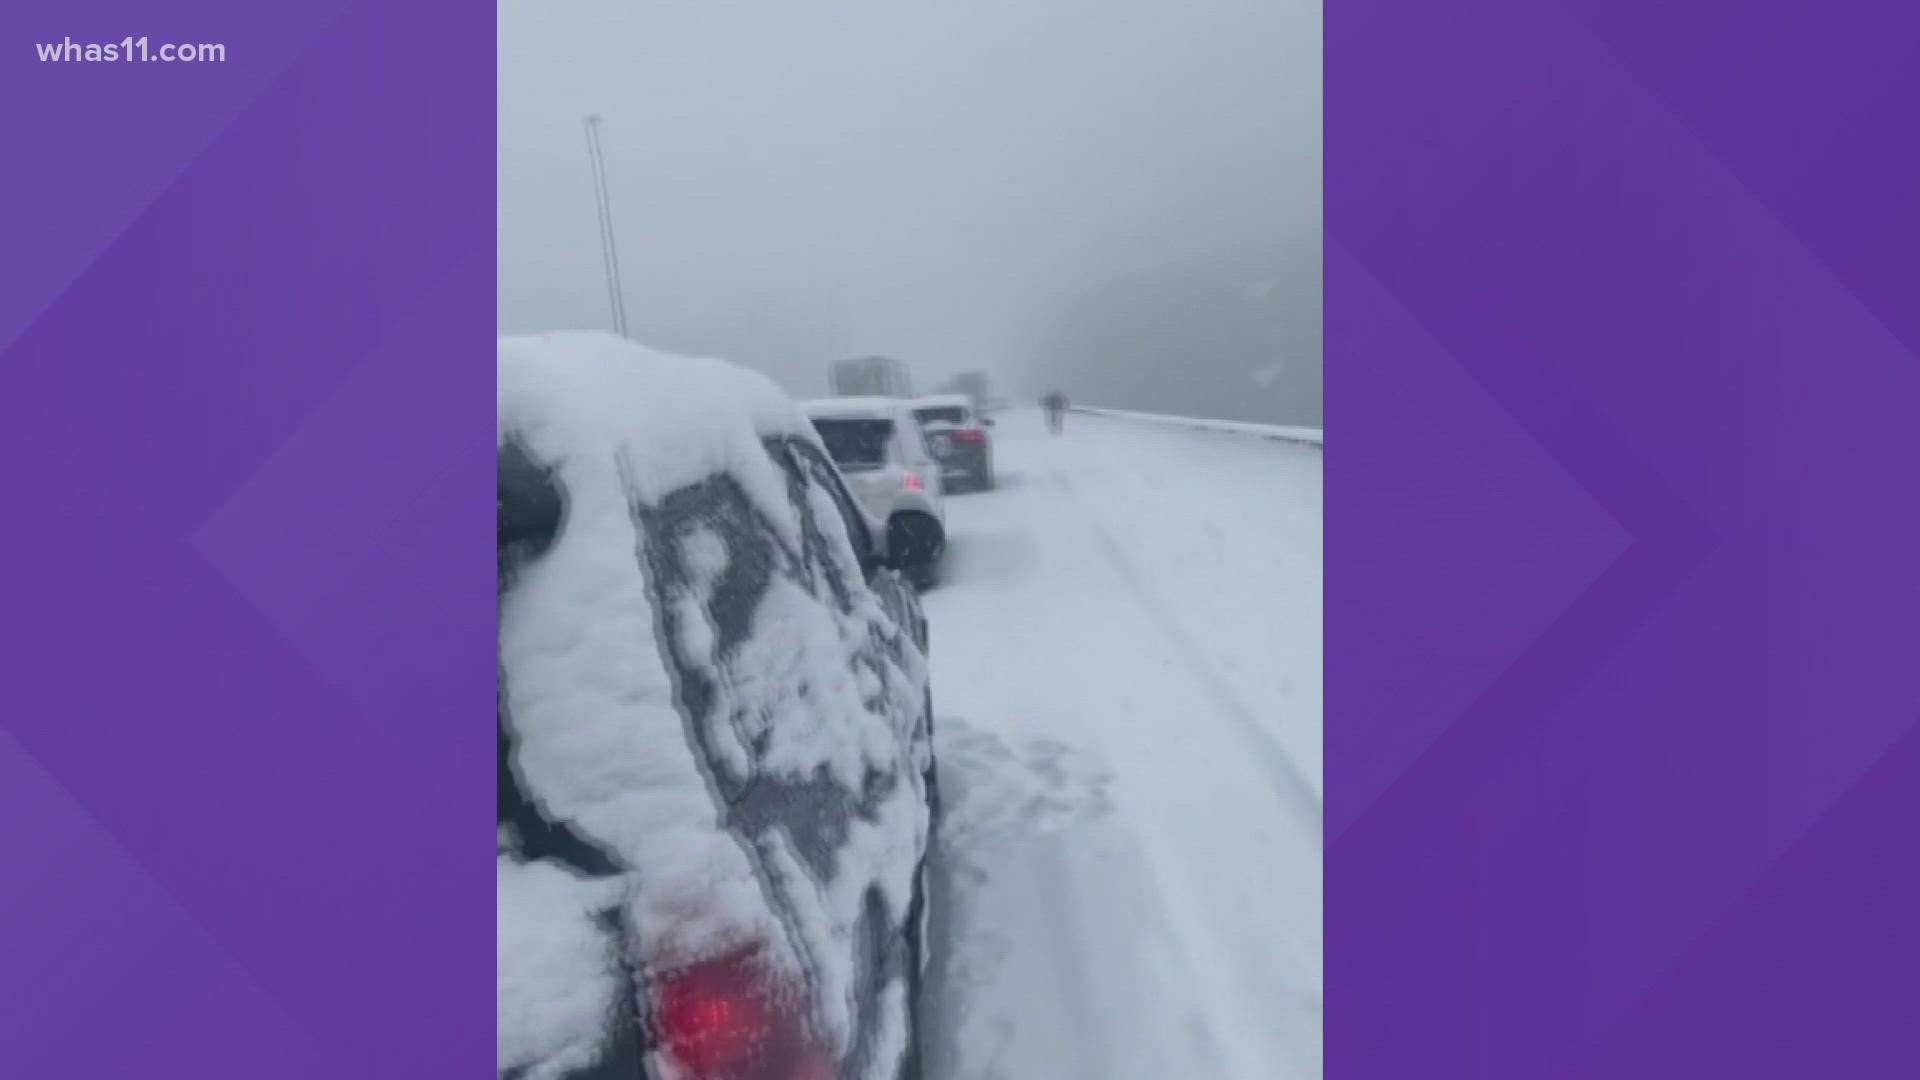 A man who travels I-75 every day for work was stuck for hours on the bridge during Thursday's snowfall.